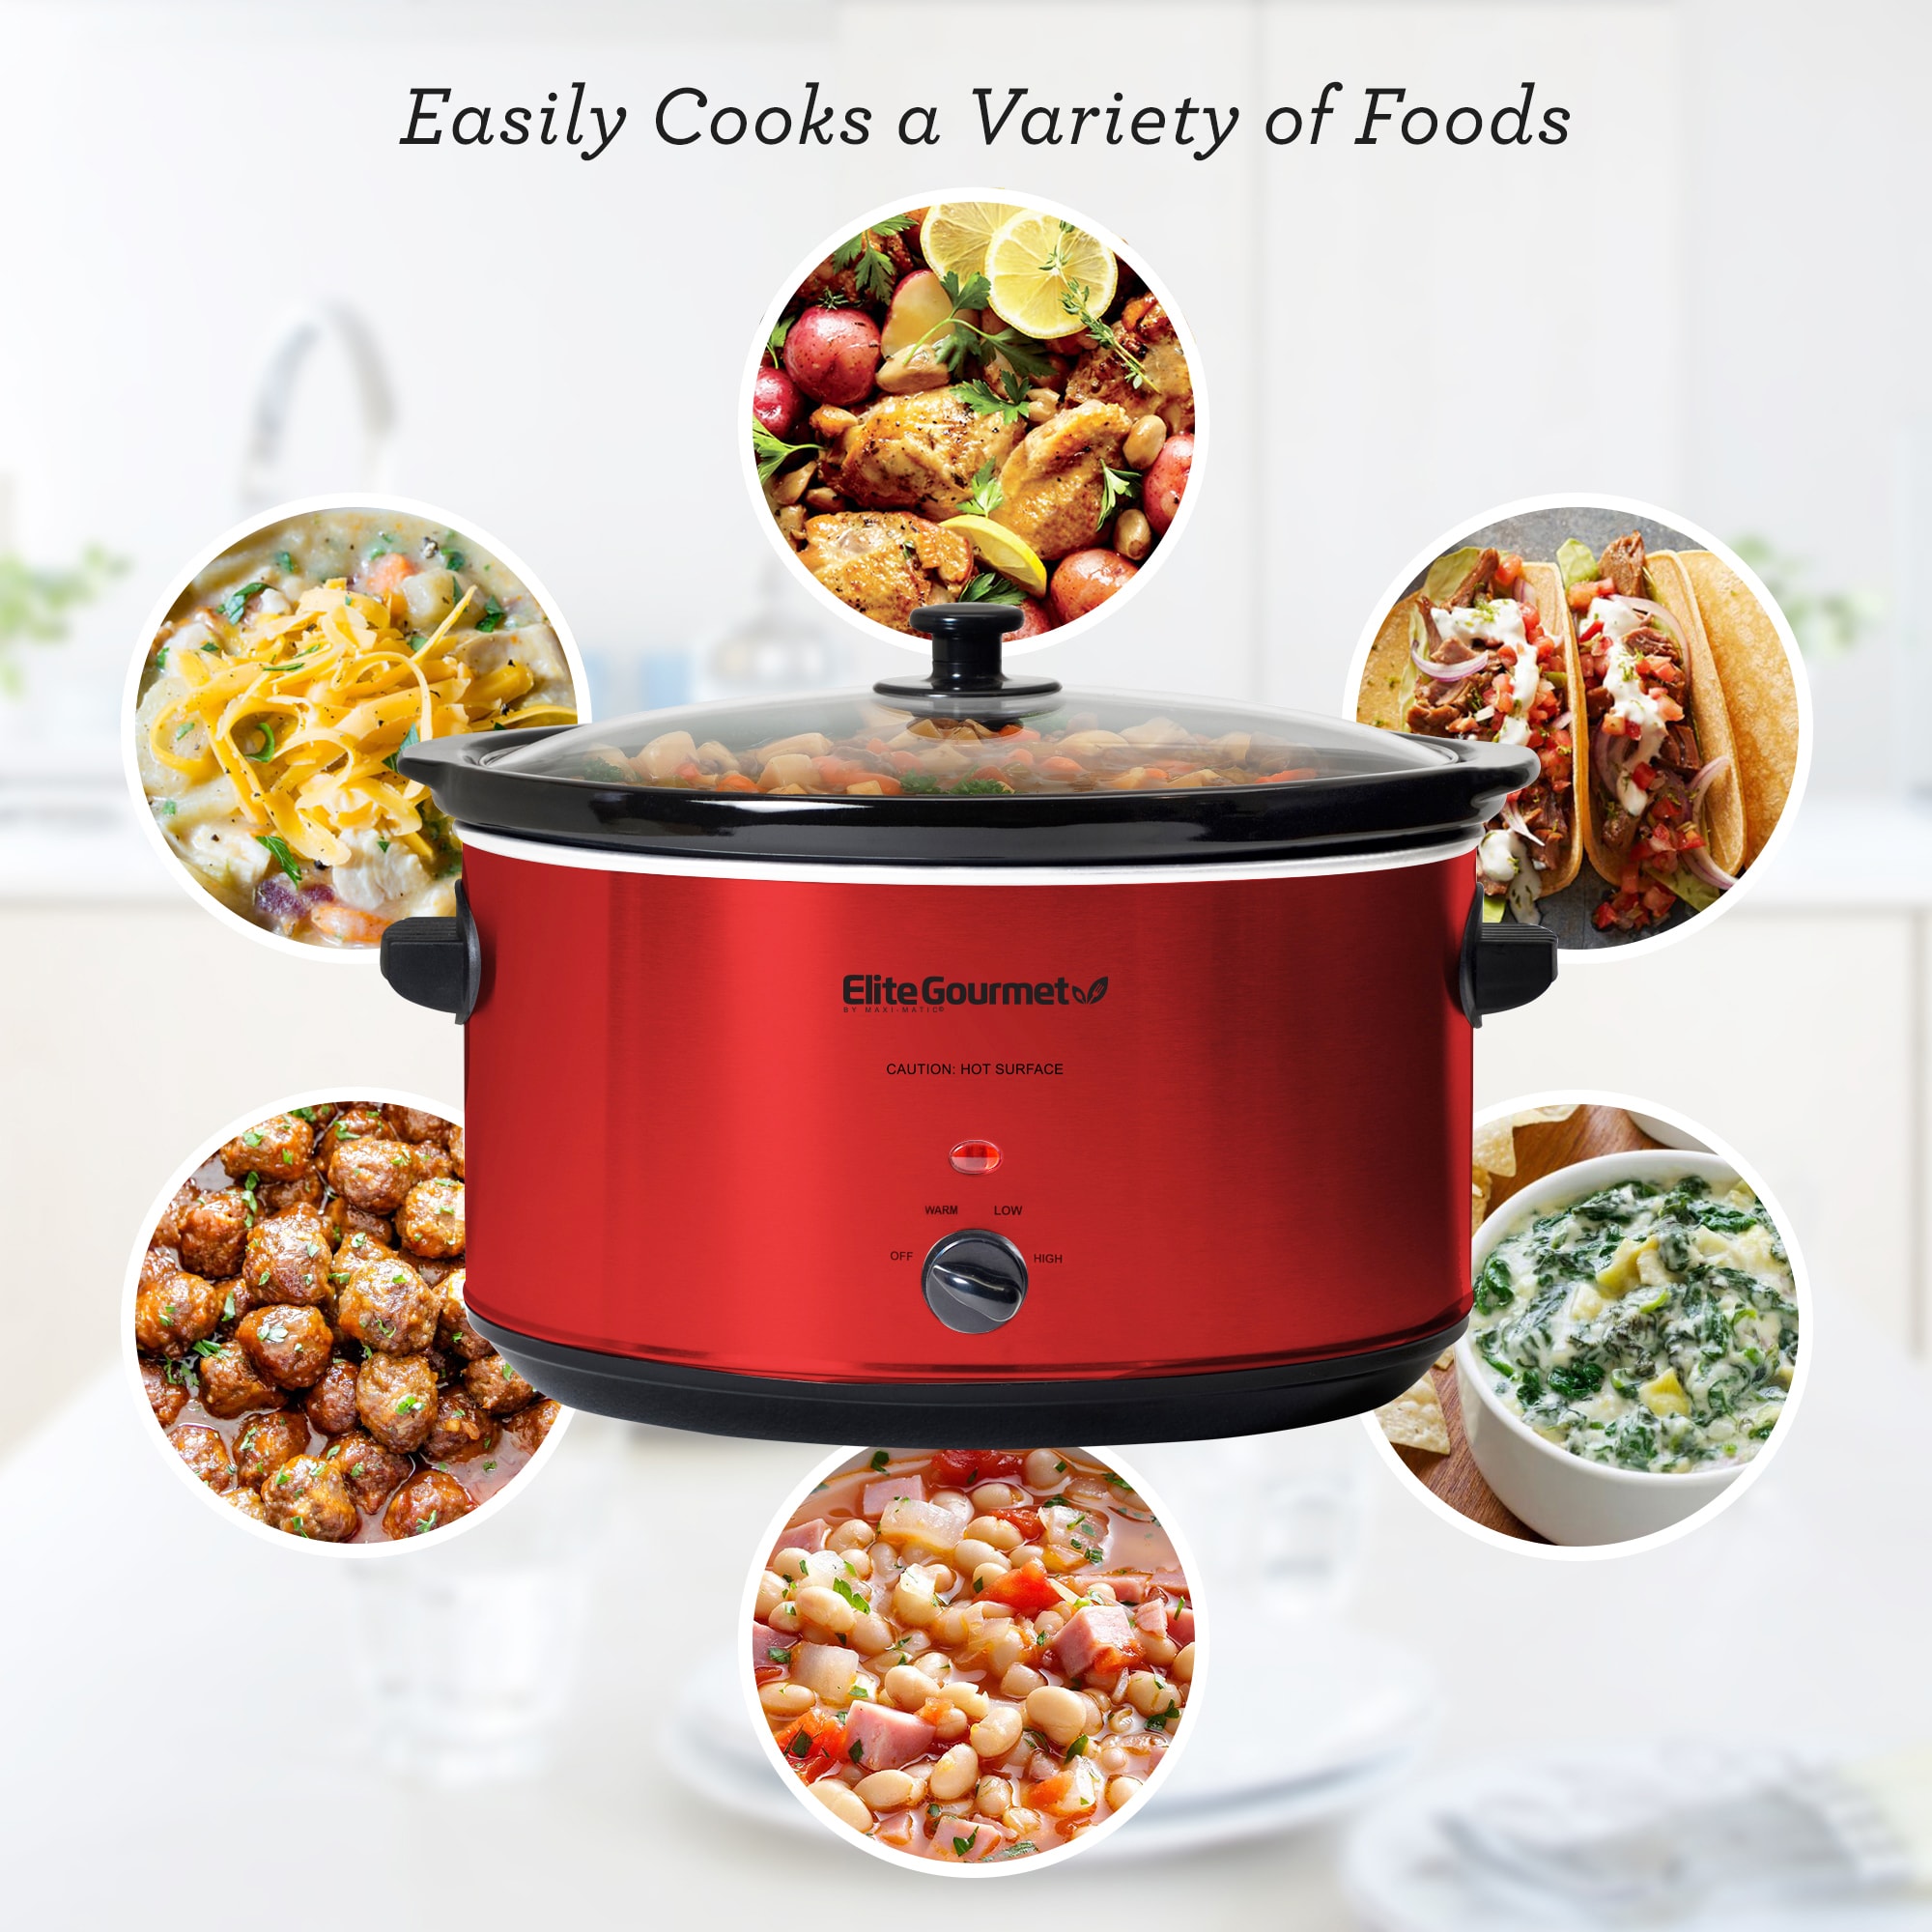 Elite 8.5-Quart Red Oval Slow Cooker with Stoneware Liner - Programmable,  Keep Warm Setting, Gourmet Stainless Steel Model